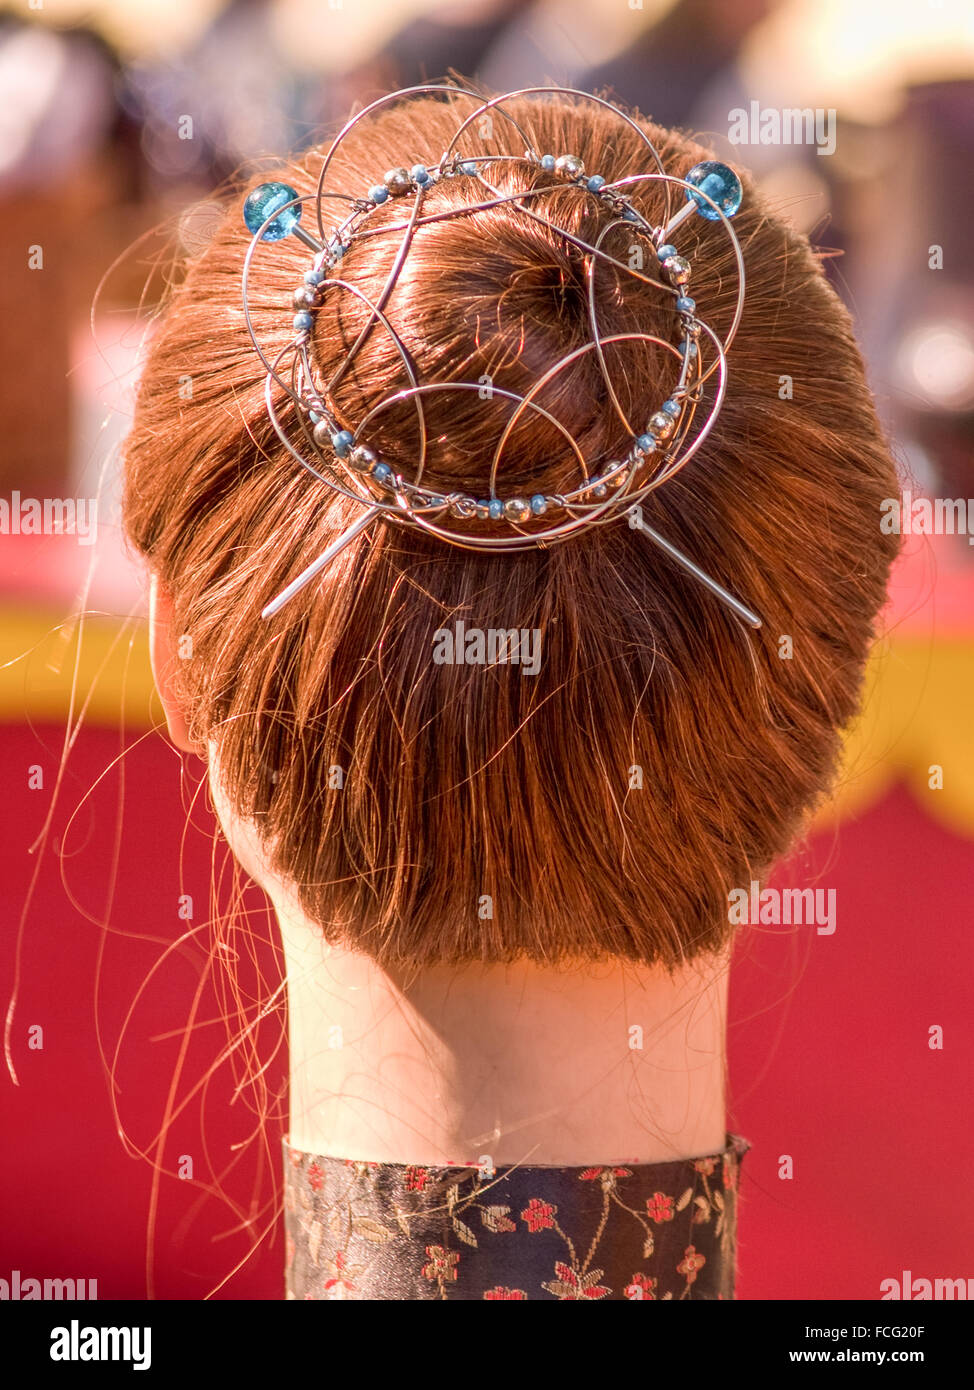 Neck and back of head of mannequin with red hair in a bun being held up by wire hair pins at Renaissance Festival in Michigan. Stock Photo